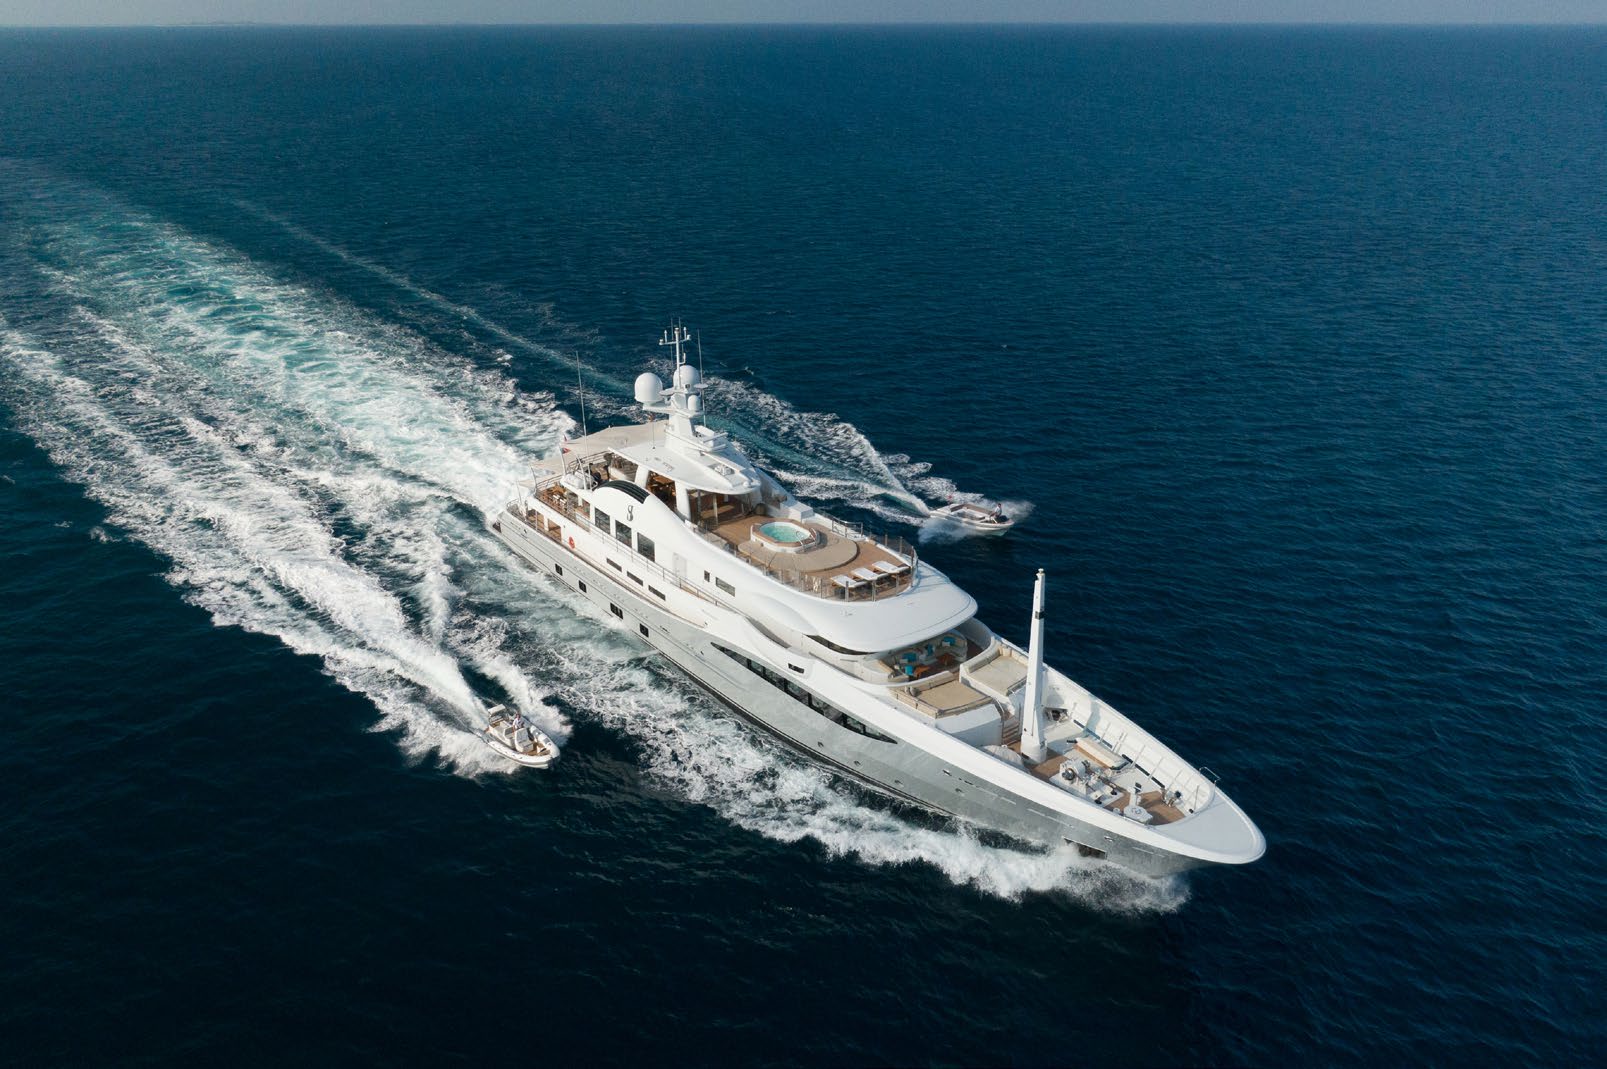 Luxury Yacht From AMELS